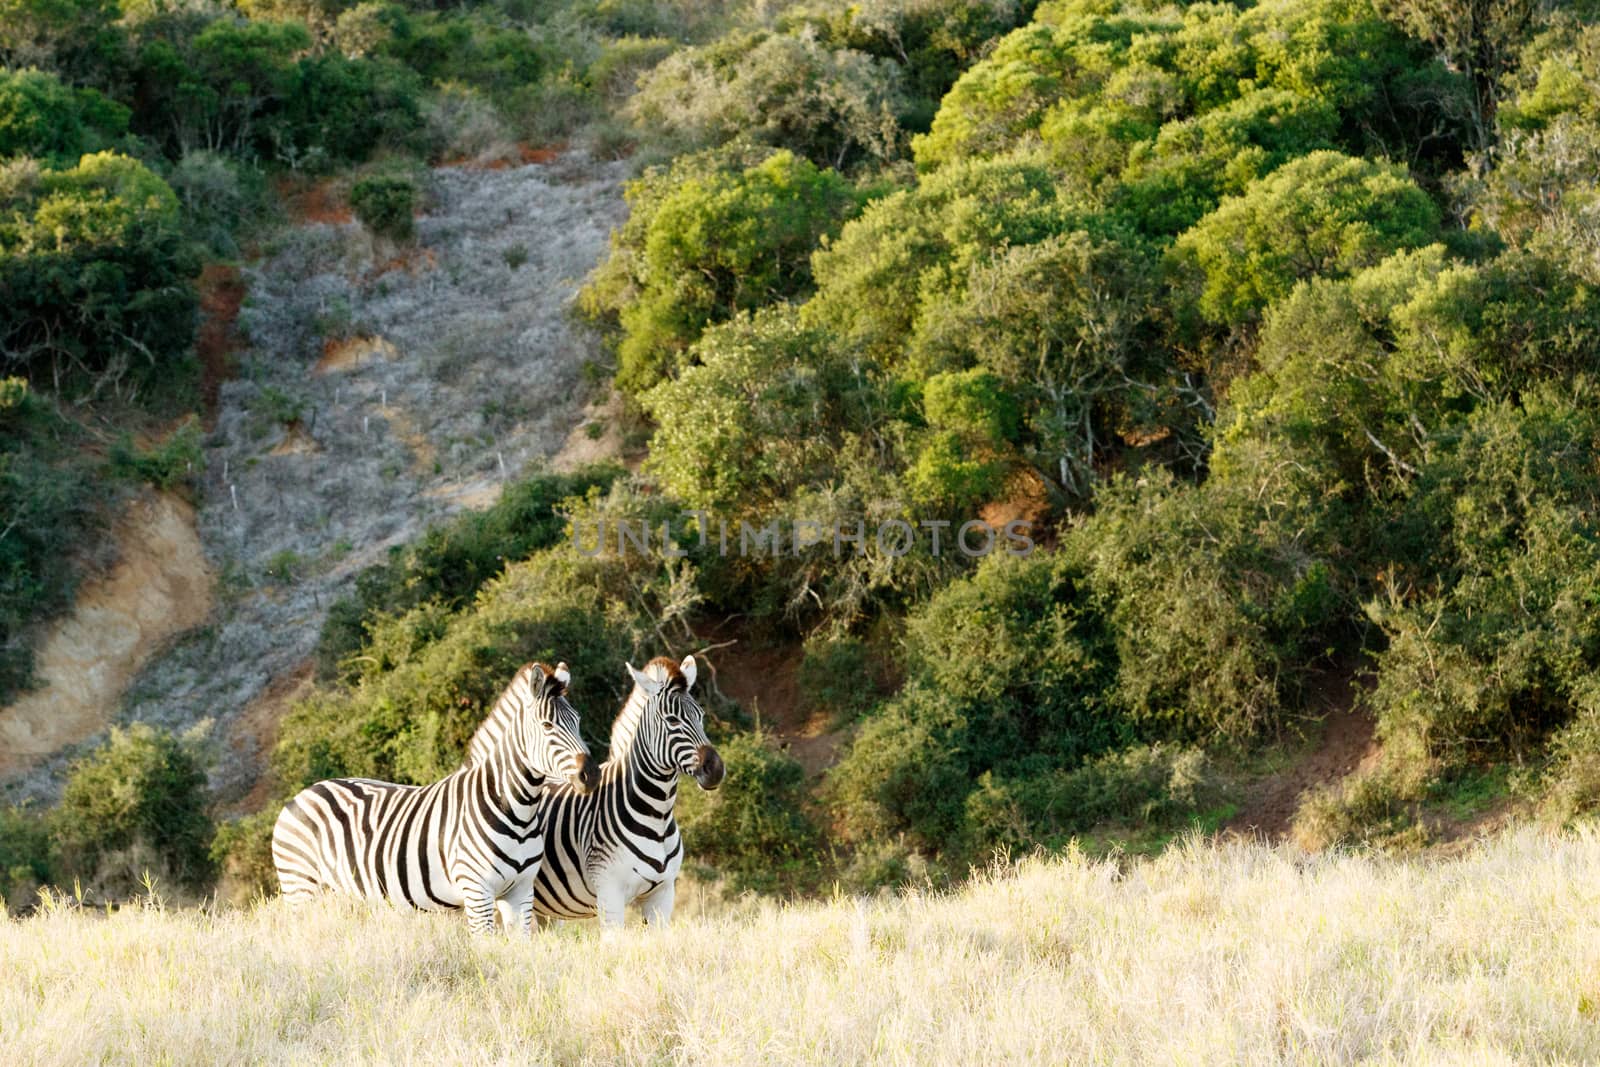 Two Zebra standing in a similar position in the field.